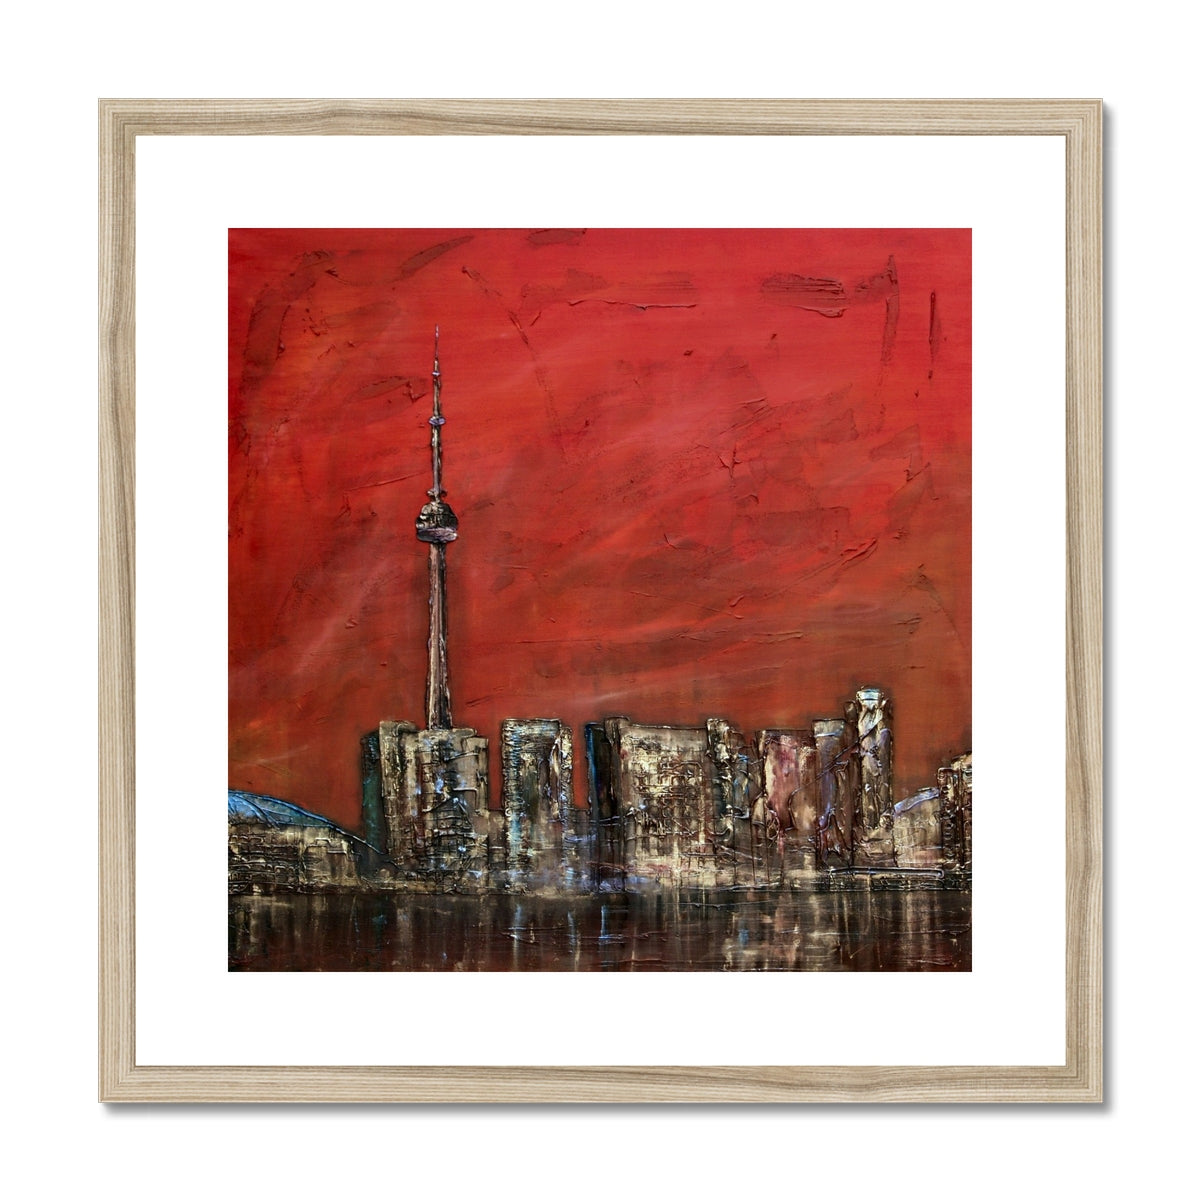 Toronto Sunset Painting | Framed & Mounted Prints From Scotland-Framed & Mounted Prints-World Art Gallery-20"x20"-Natural Frame-Paintings, Prints, Homeware, Art Gifts From Scotland By Scottish Artist Kevin Hunter